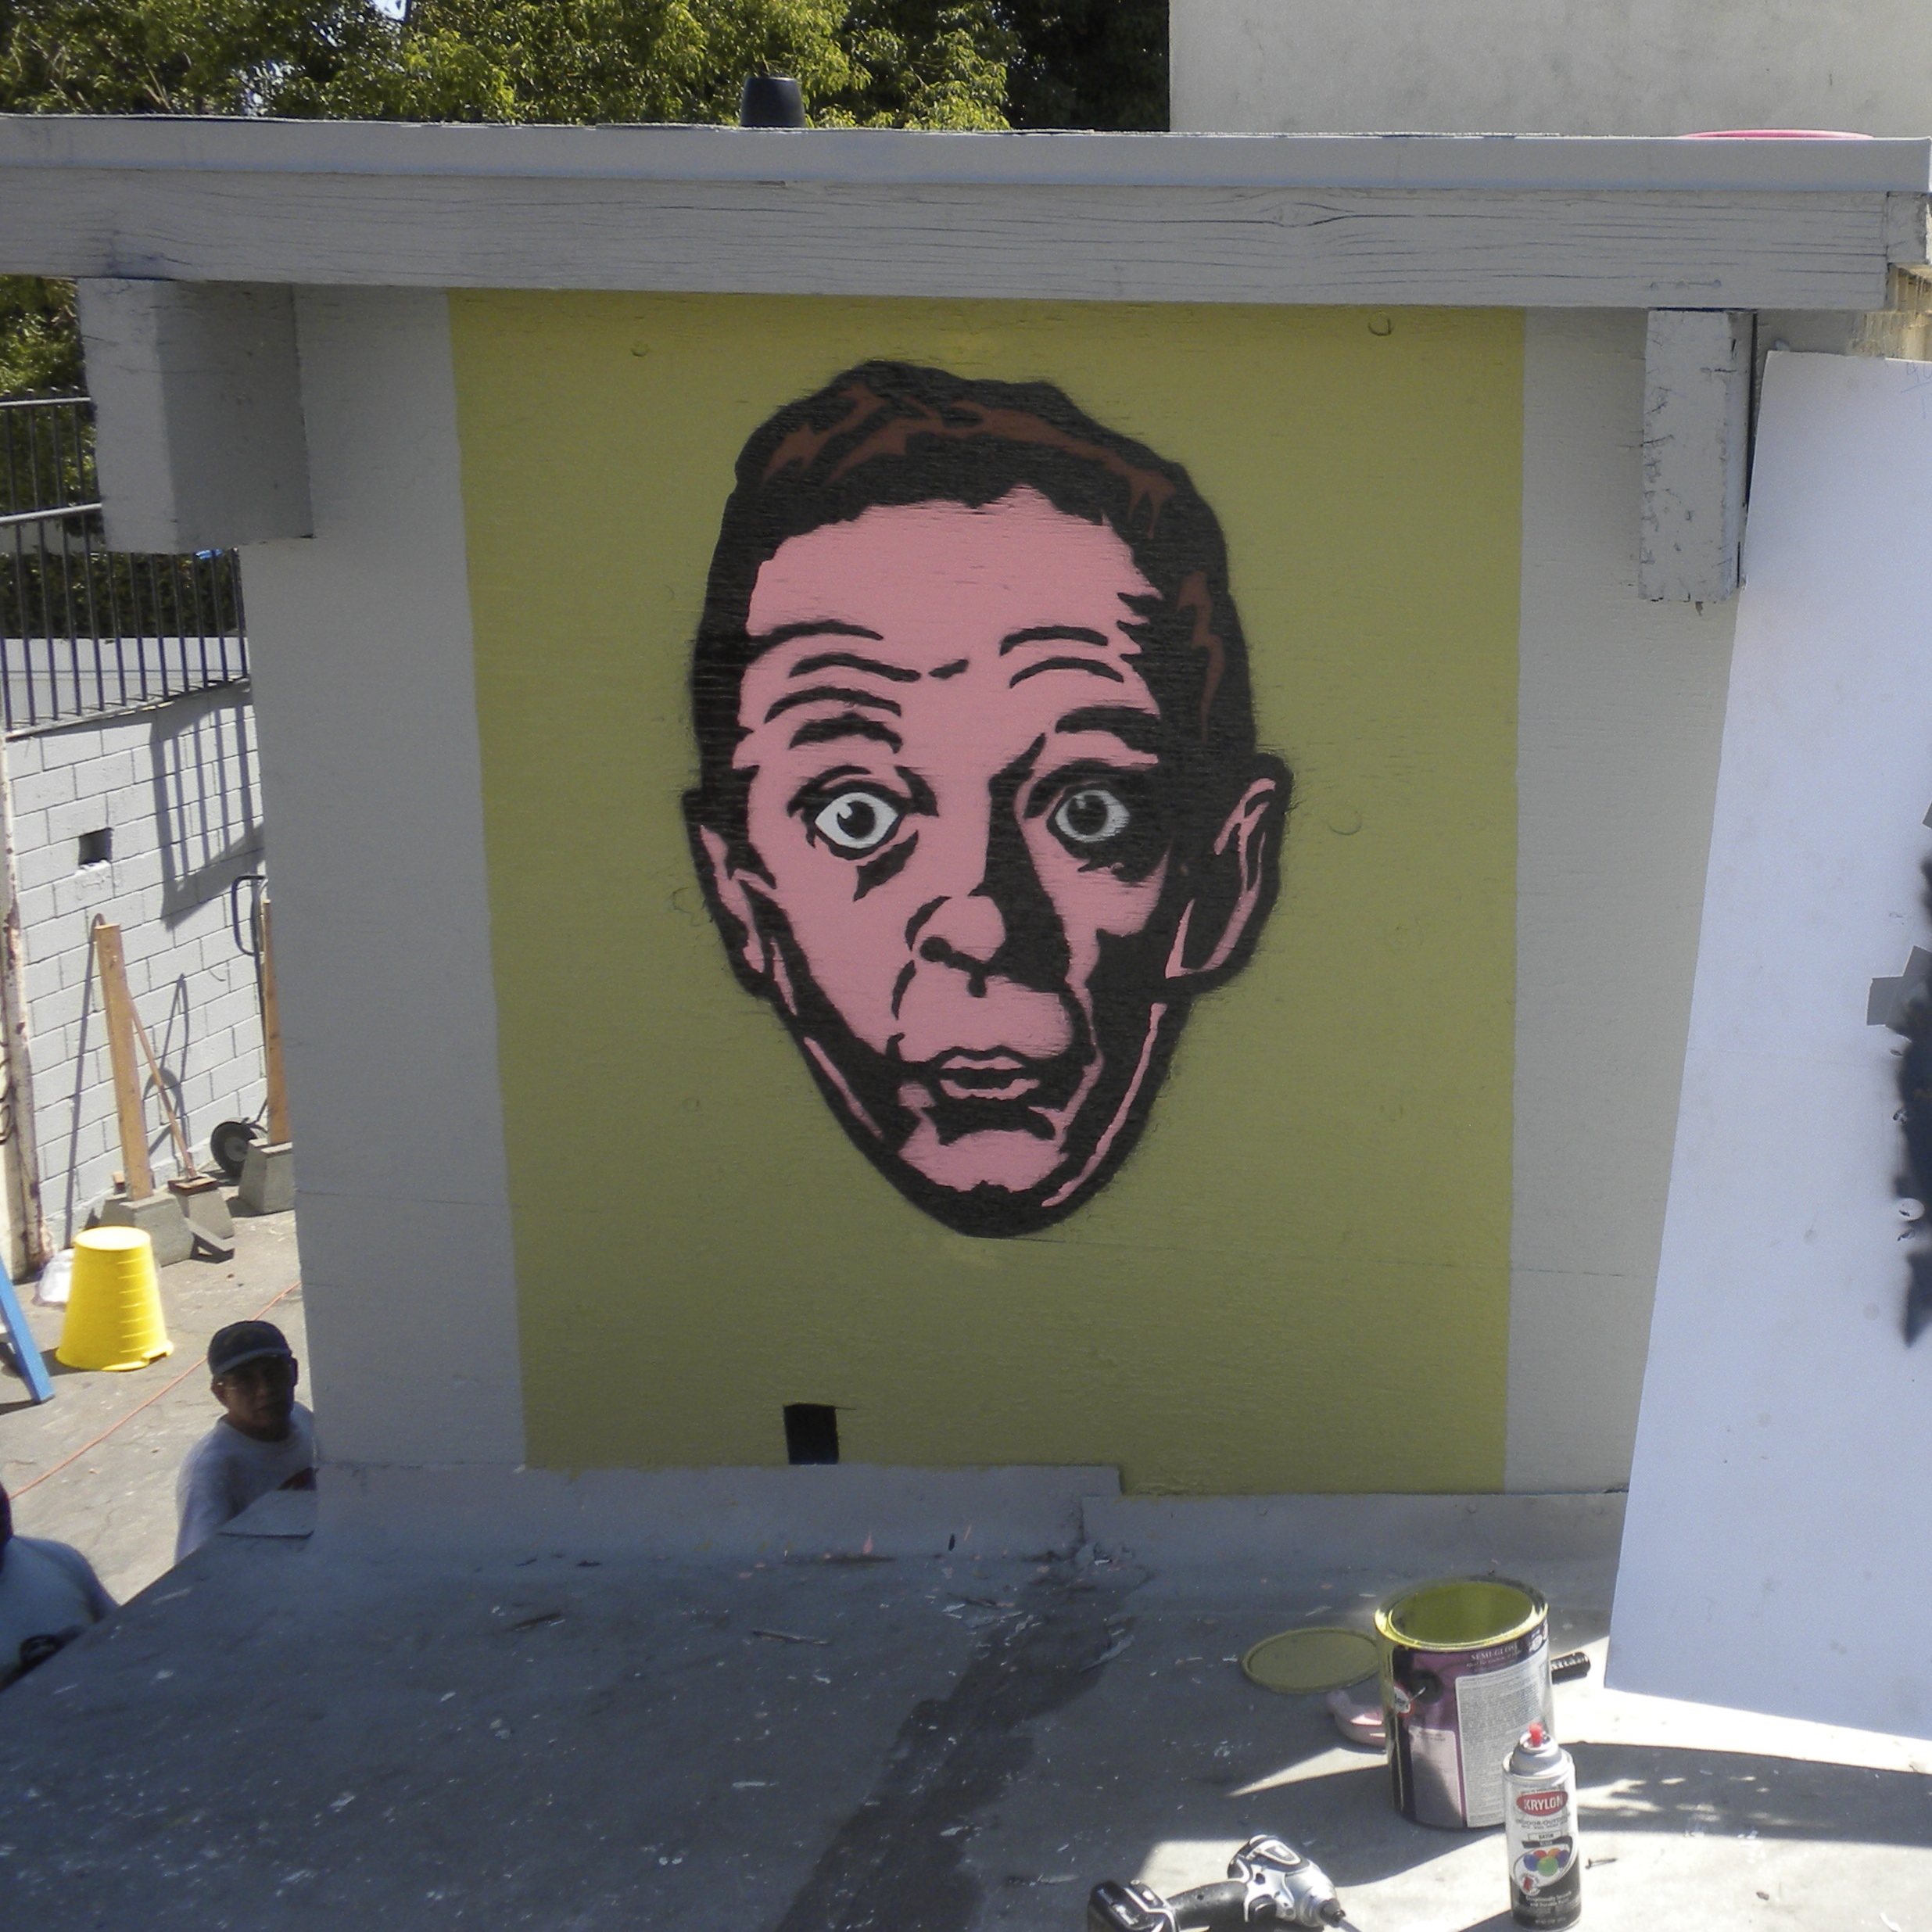 Don Knotts stencil in Echo Park (Los Angeles) CA.